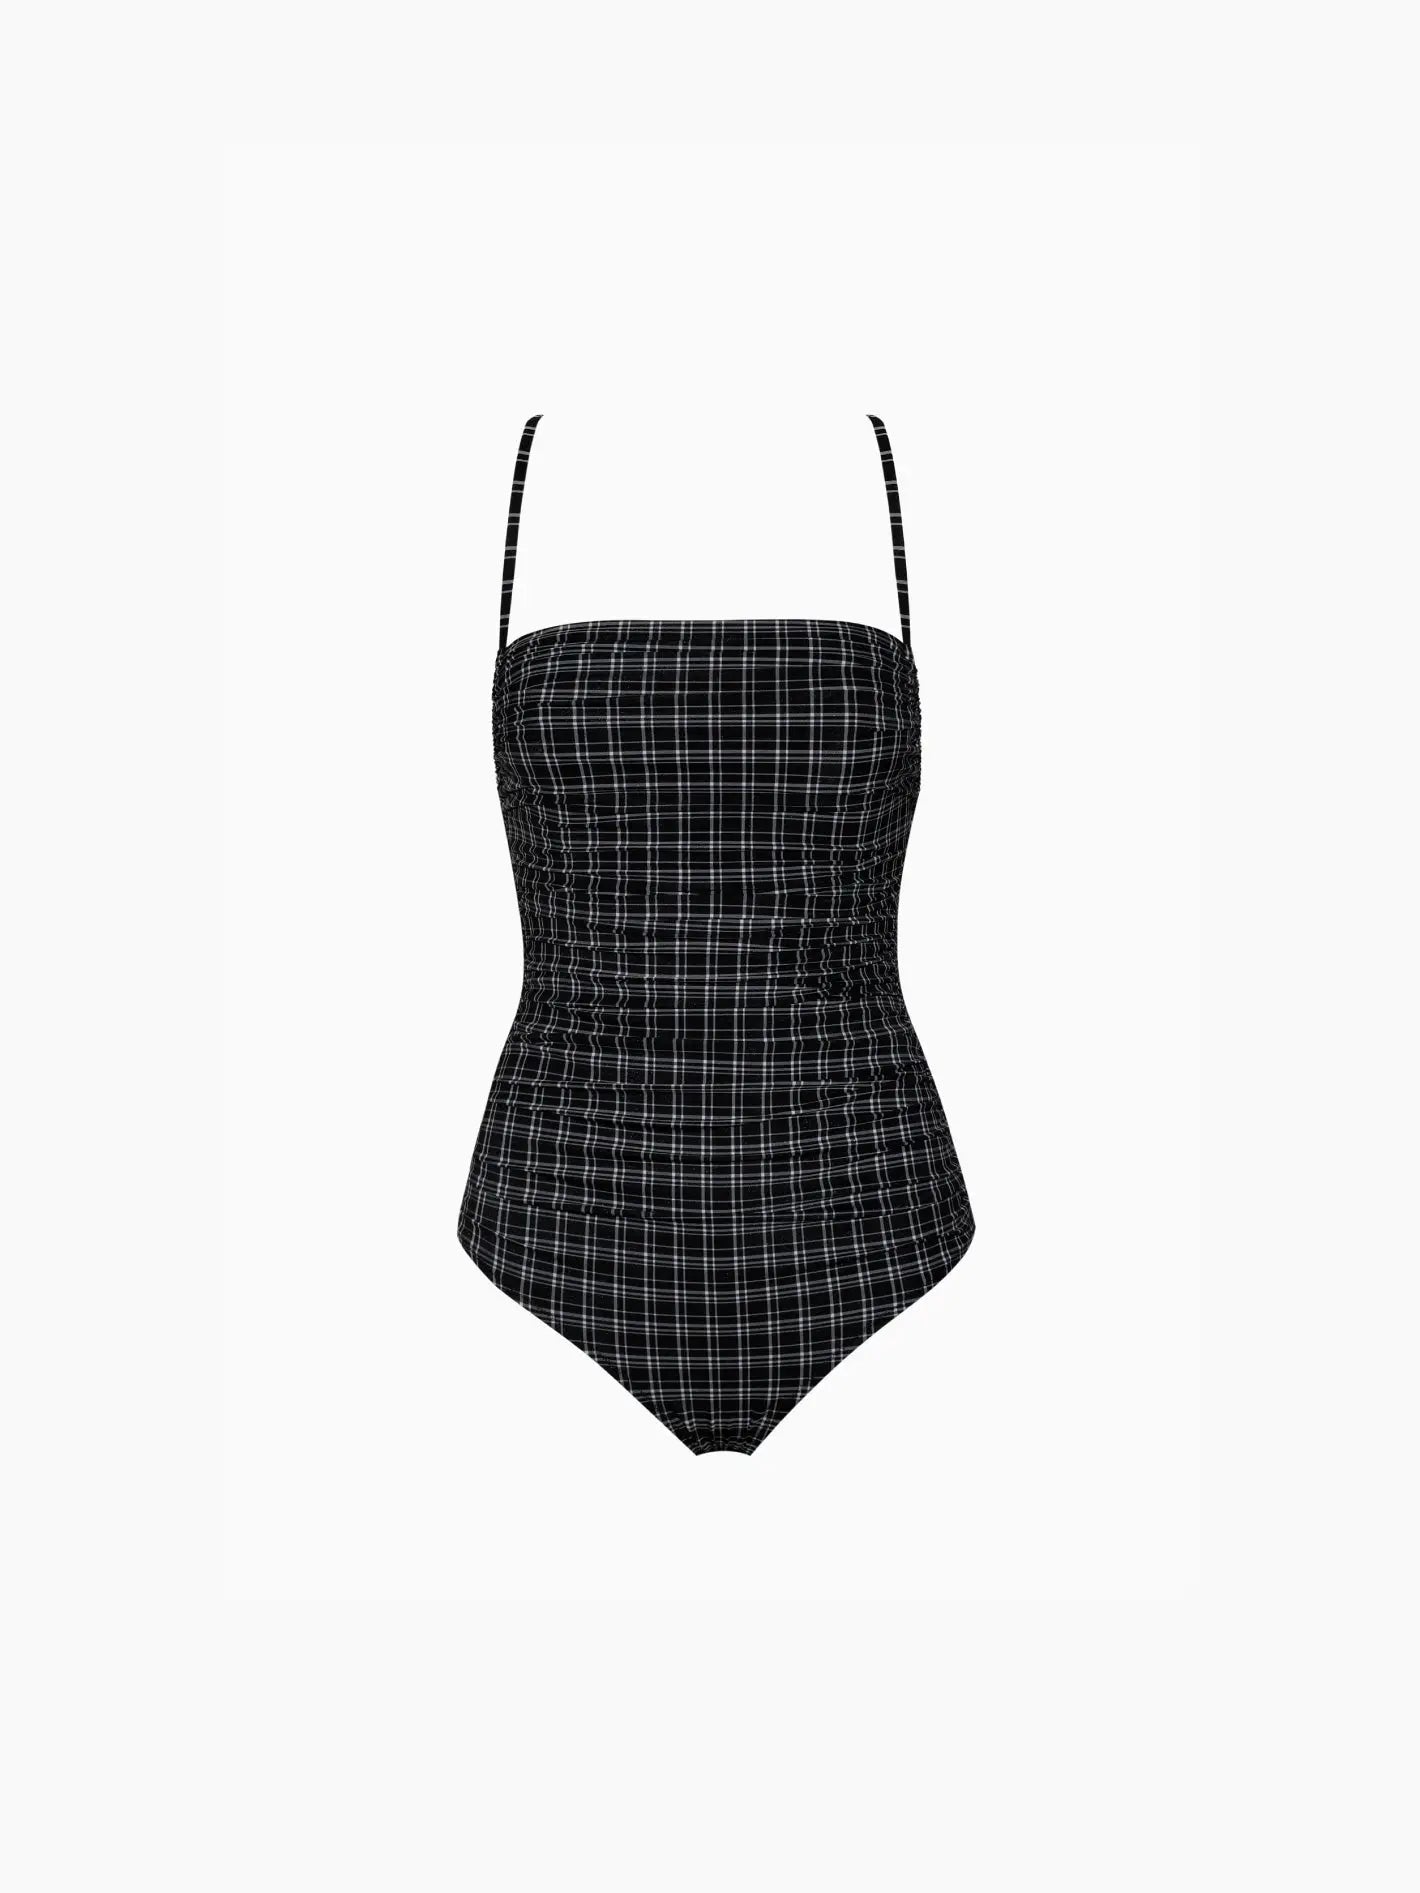 A Birkin Swimwear B&W one-piece swimsuit by Pale with a white plaid pattern, perfect for any beach day in Barcelona. The swimsuit has thin shoulder straps and a square neckline. The fabric appears slightly ruched and form-fitting, ensuring elegance and comfort. Shop this look at bassalstore on a plain white background.